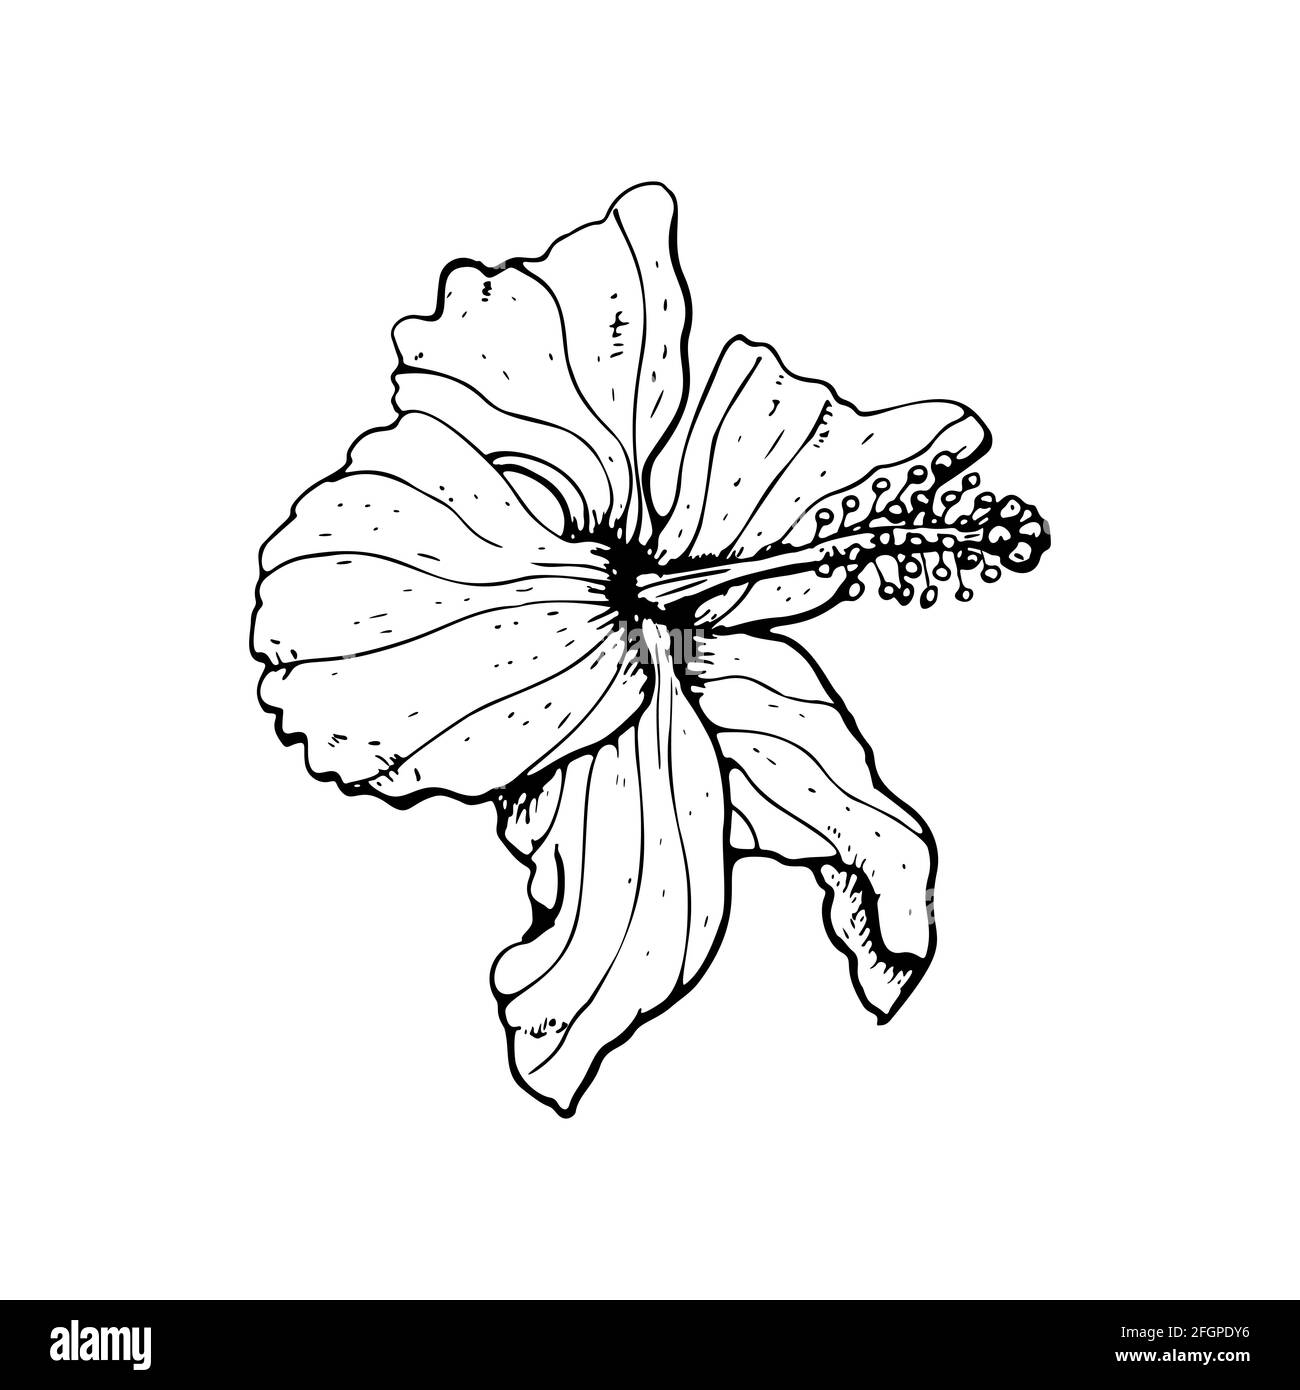 How to draw a hibiscus flower step by step for kids  YouTube